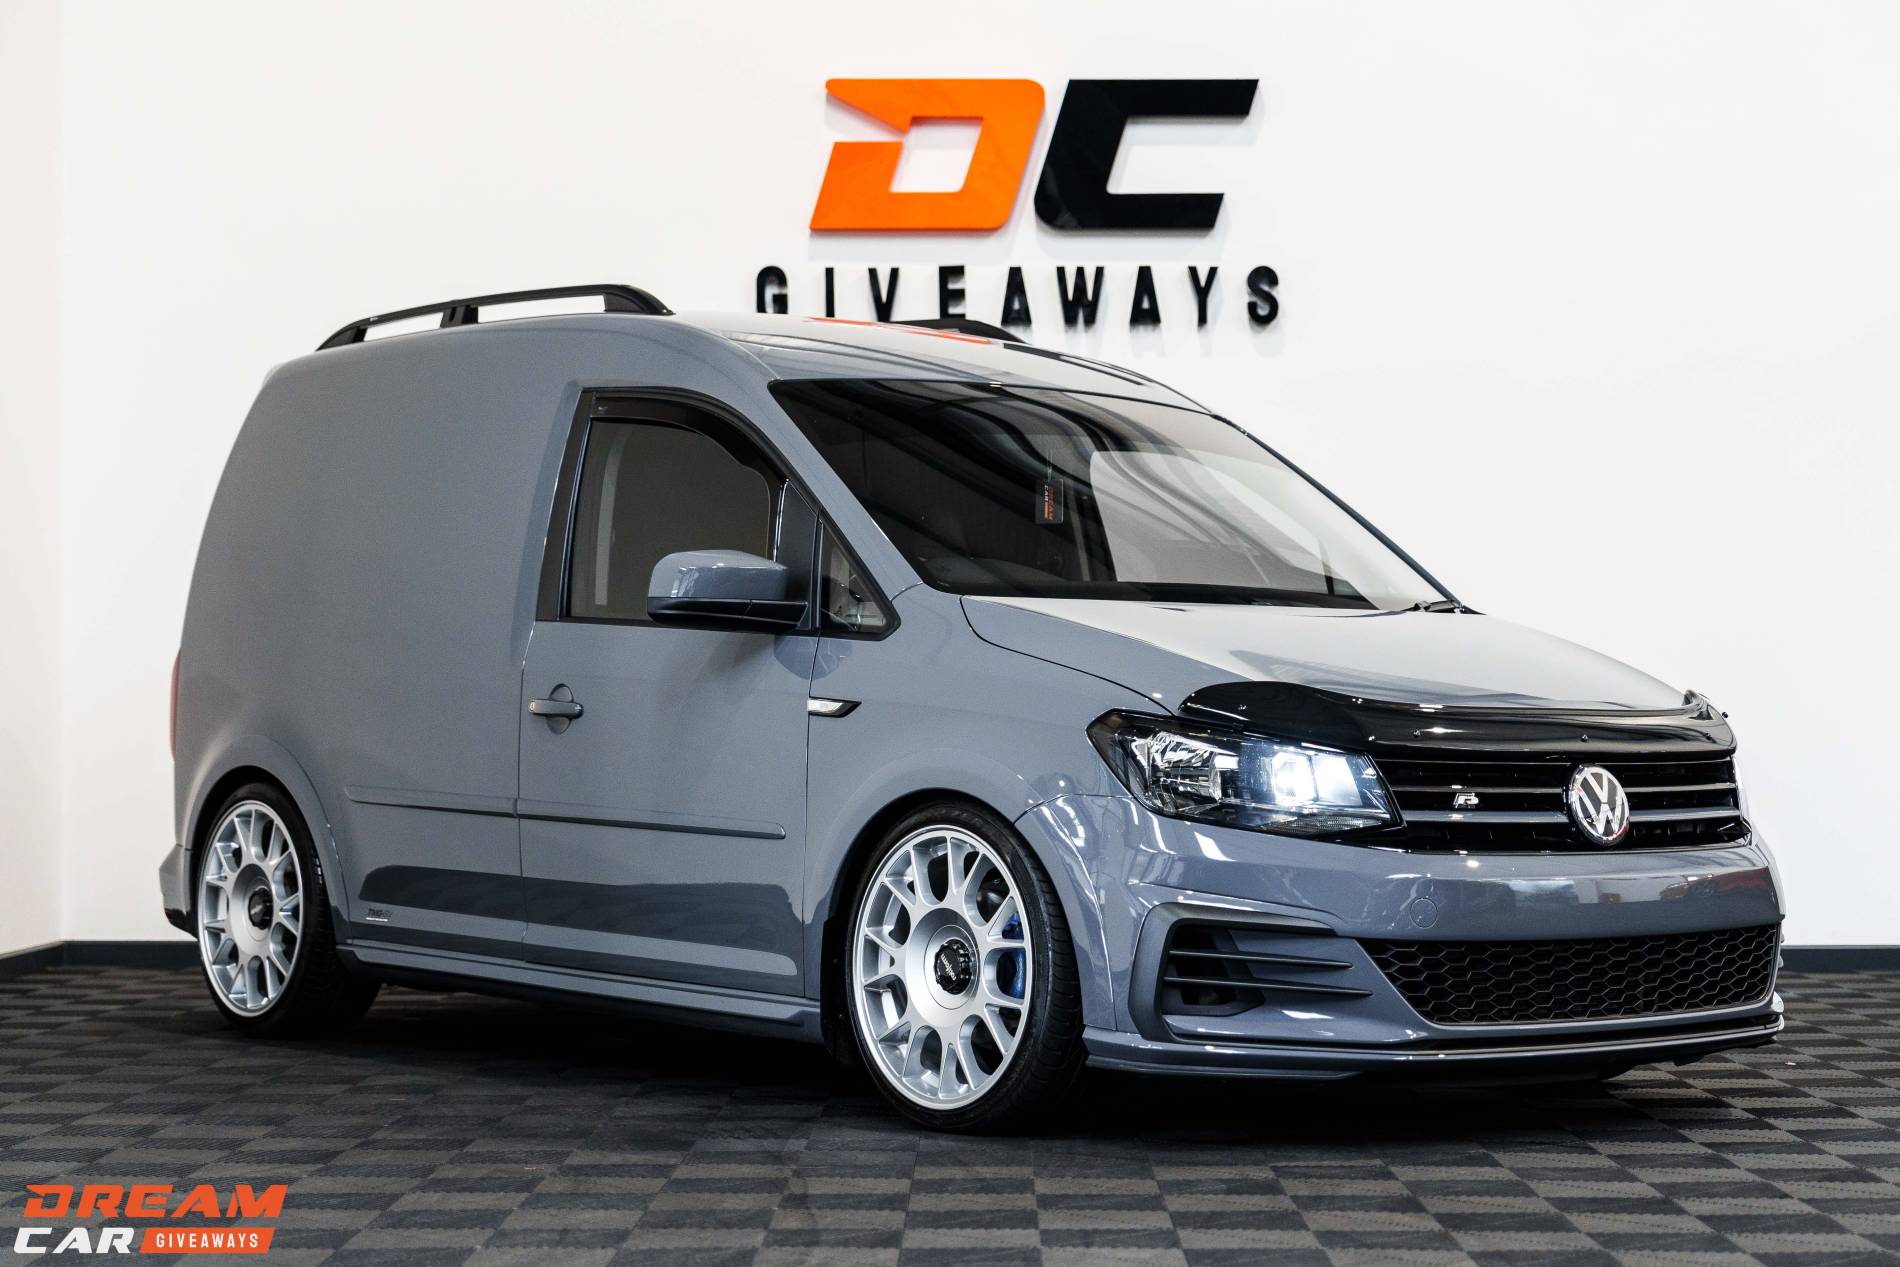 Win this Pure Grey Volkswagen Caddy & £5,000 Tax Free